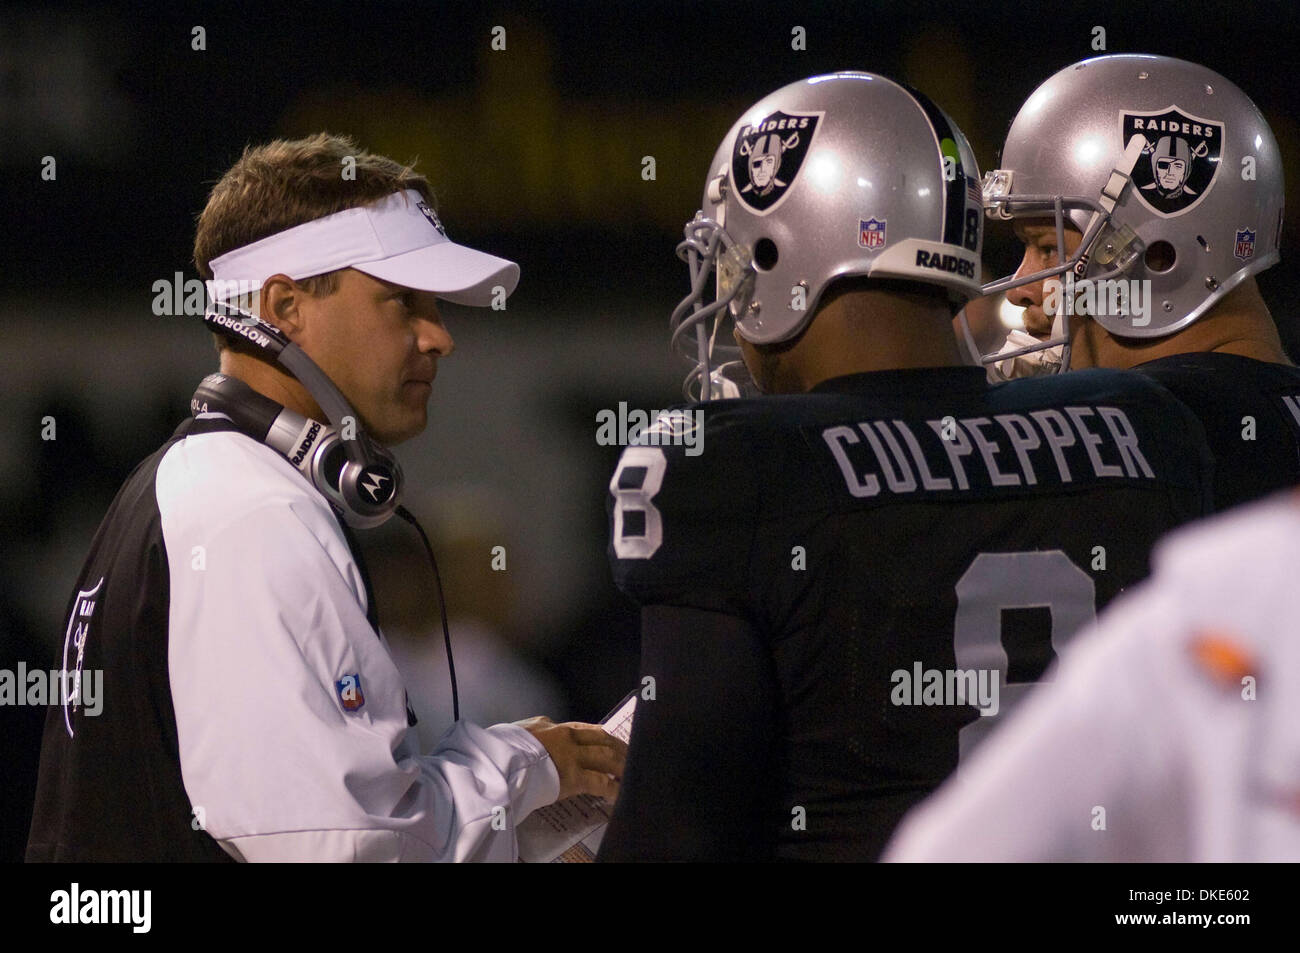 Aug 13, 2007 - OAKLAND, CA, USA - Oakland Raiders head coach LANE KIFFIN gives instructions to DAUNTE CULPEPPER and JEREMY NEWBERRY during the pre-season game against the Arizona Cardinals at McAfee Coliseum. (Credit Image: © Al Golub/ZUMApress.com) Stock Photo